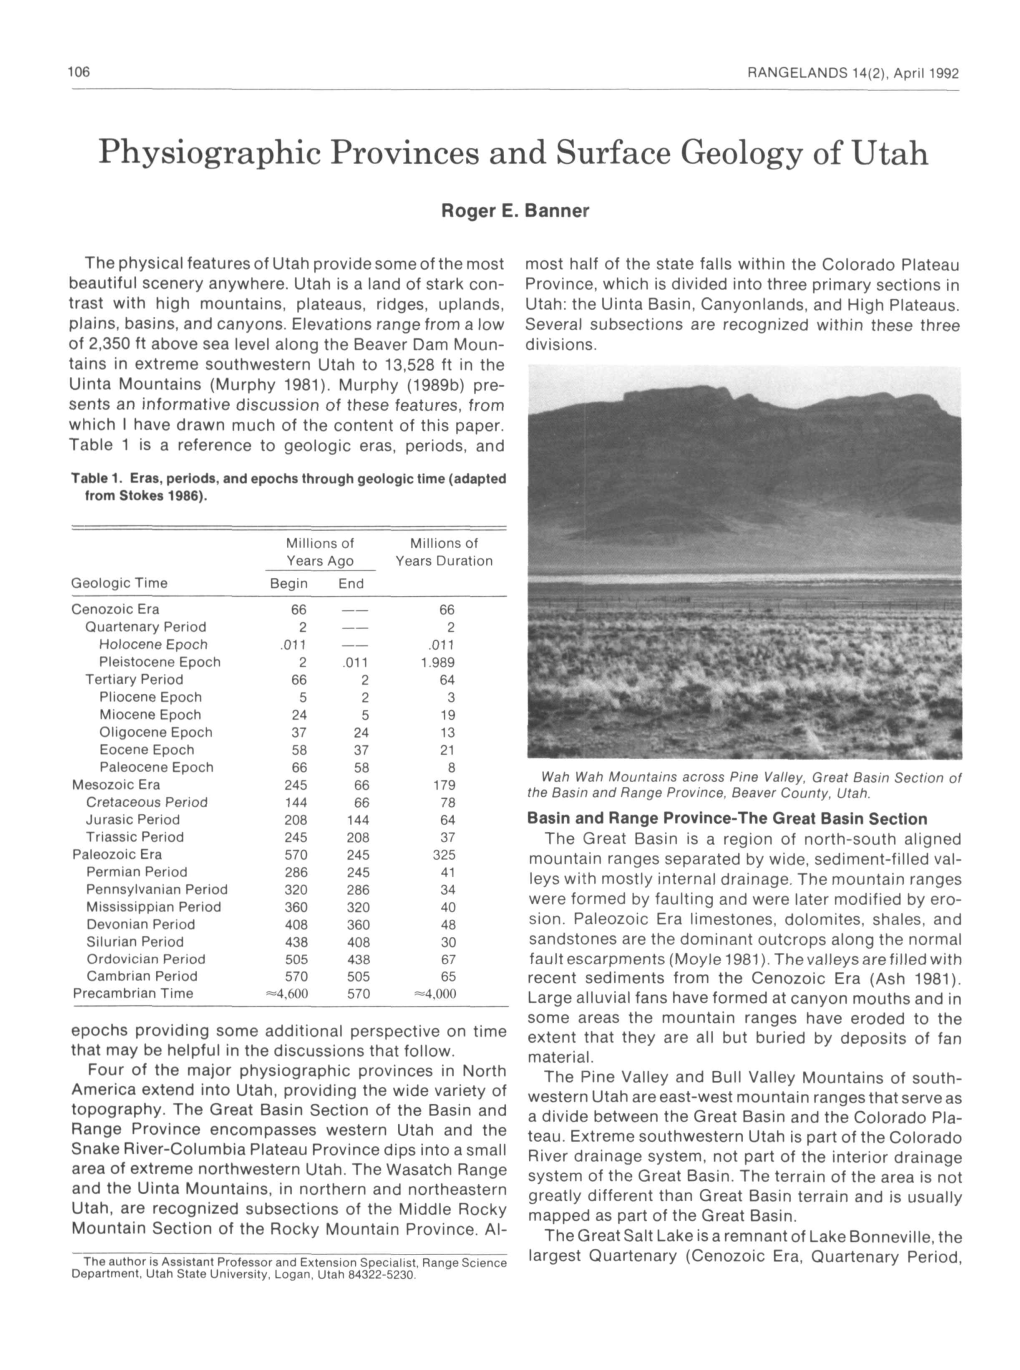 Physiographic Provinces and Surface Geology of Utah Roger E